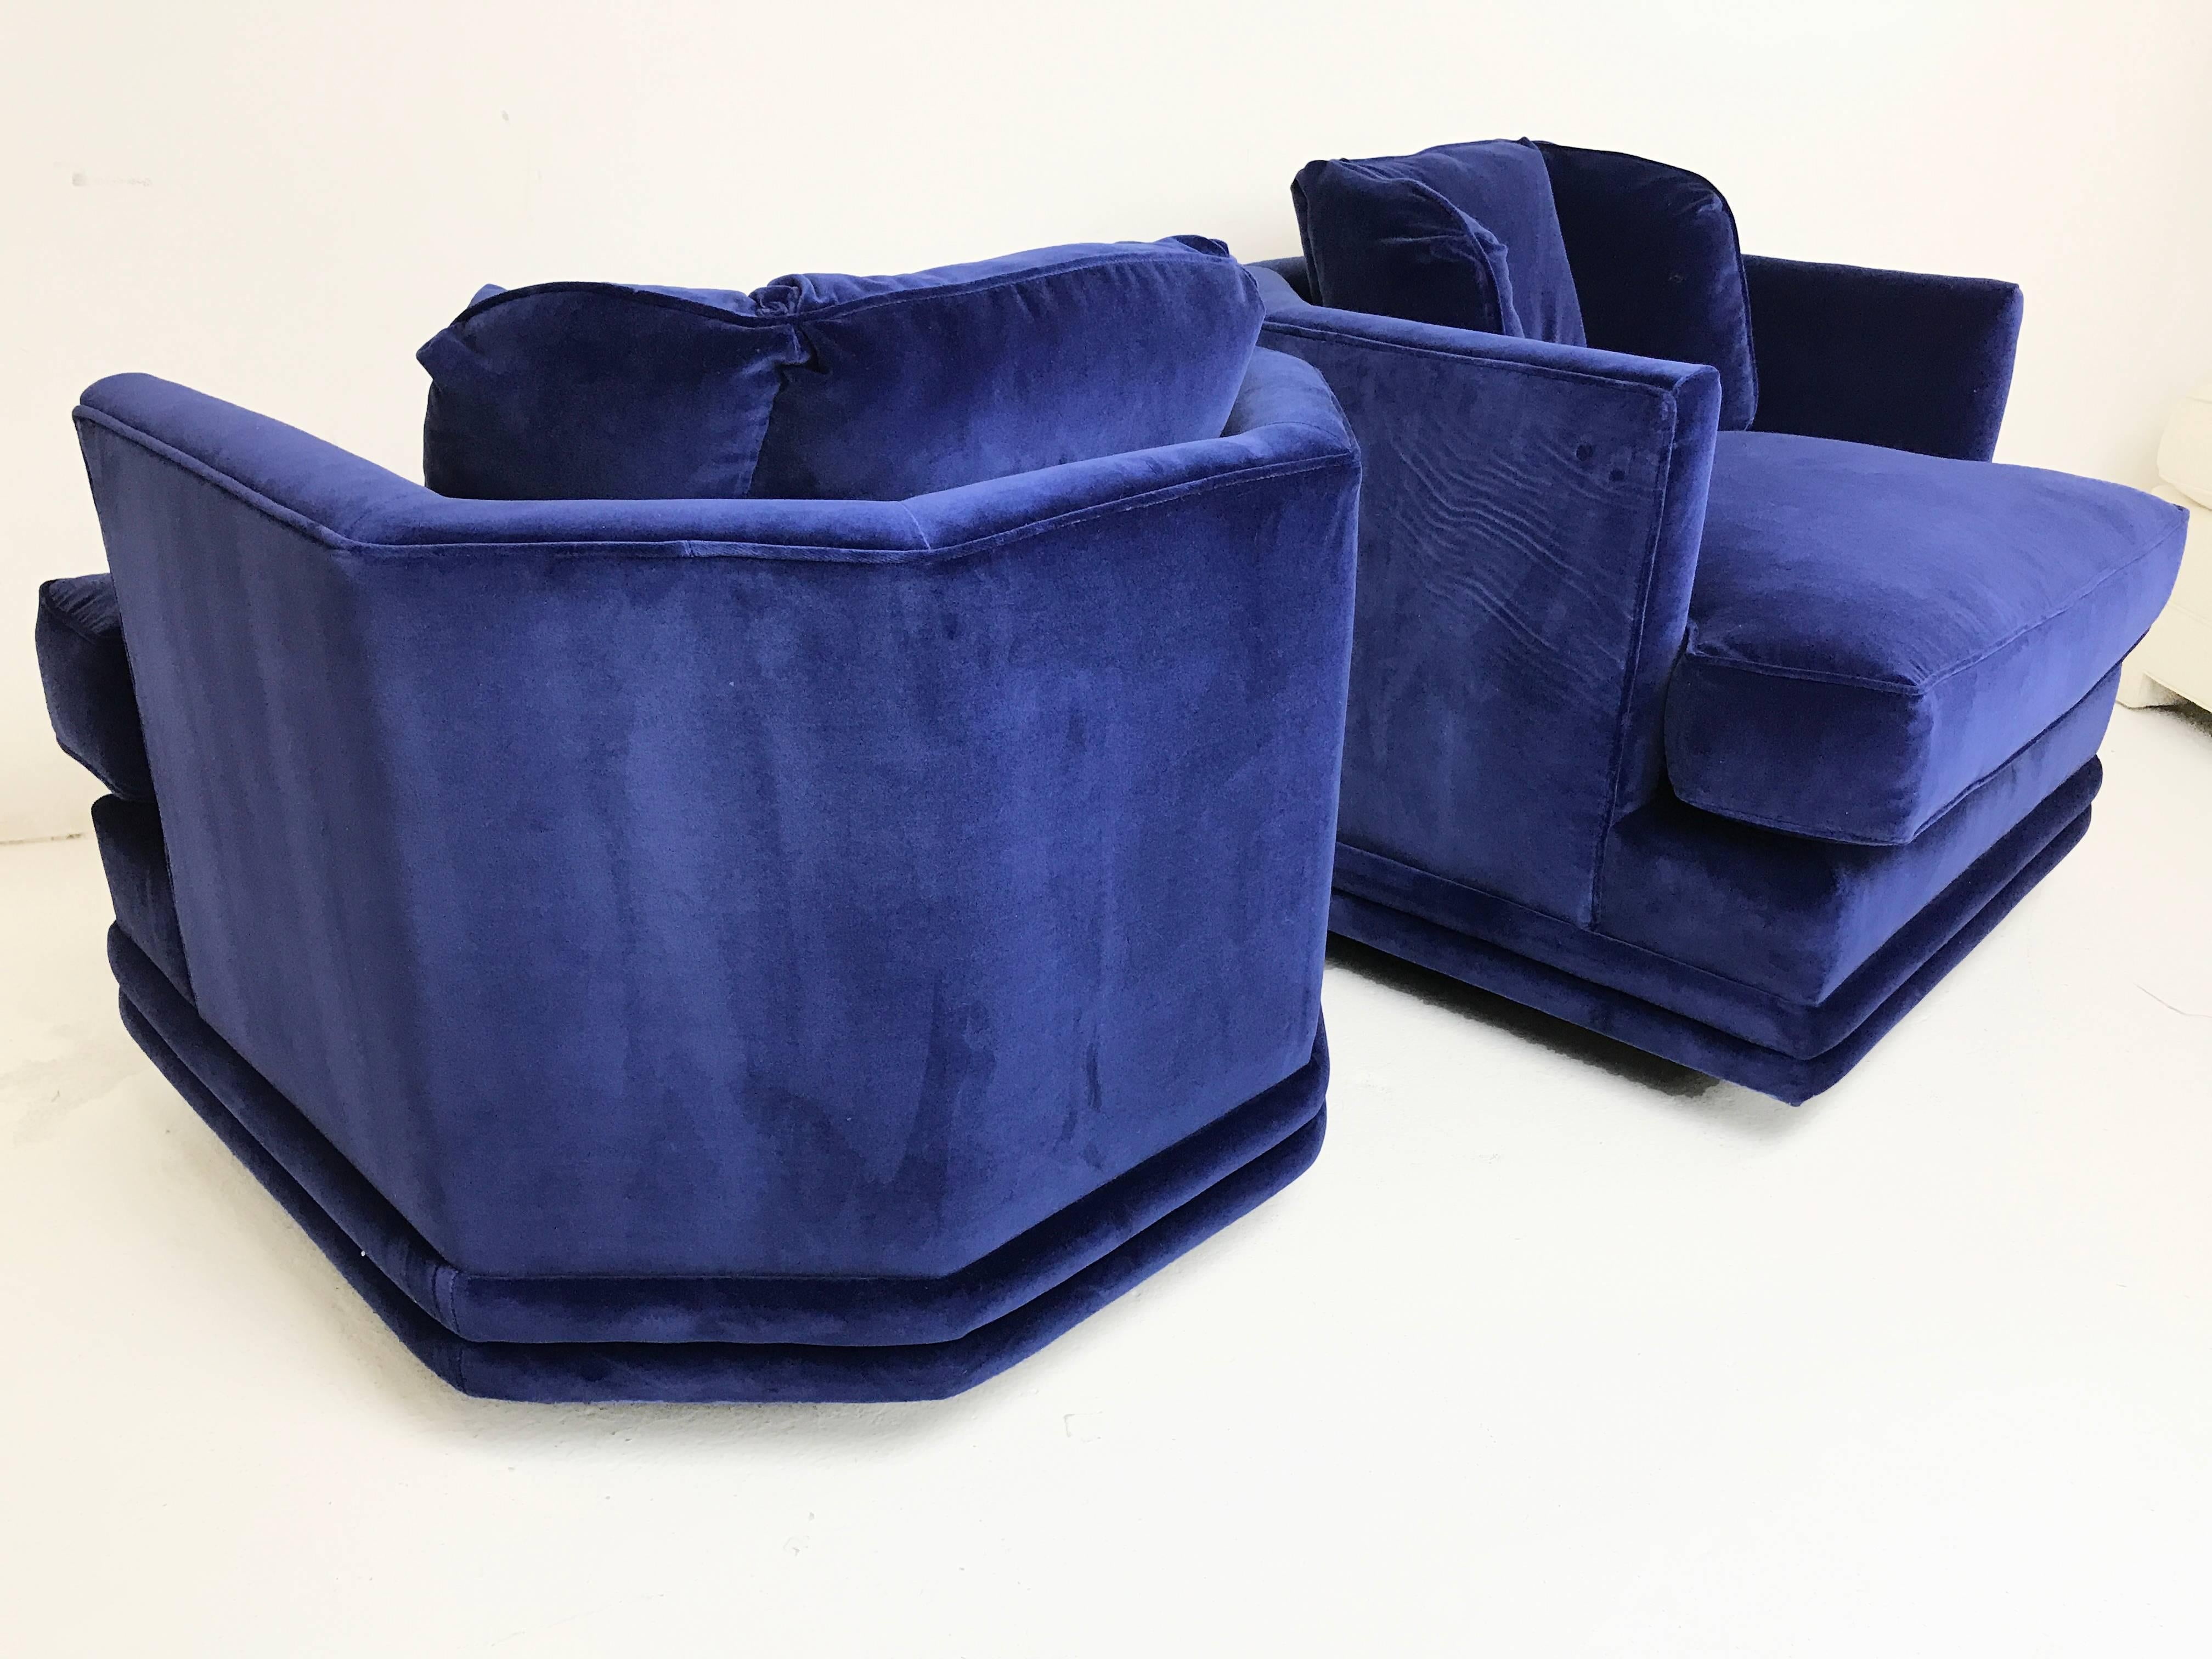 Newly upholstered hex back swivel chairs in the style of Milo Baughman. The chairs are upholstered in a blue velvet. There is a imperfection, in the velvet, on one chair's arm area.
see photos

Dimensions: 31